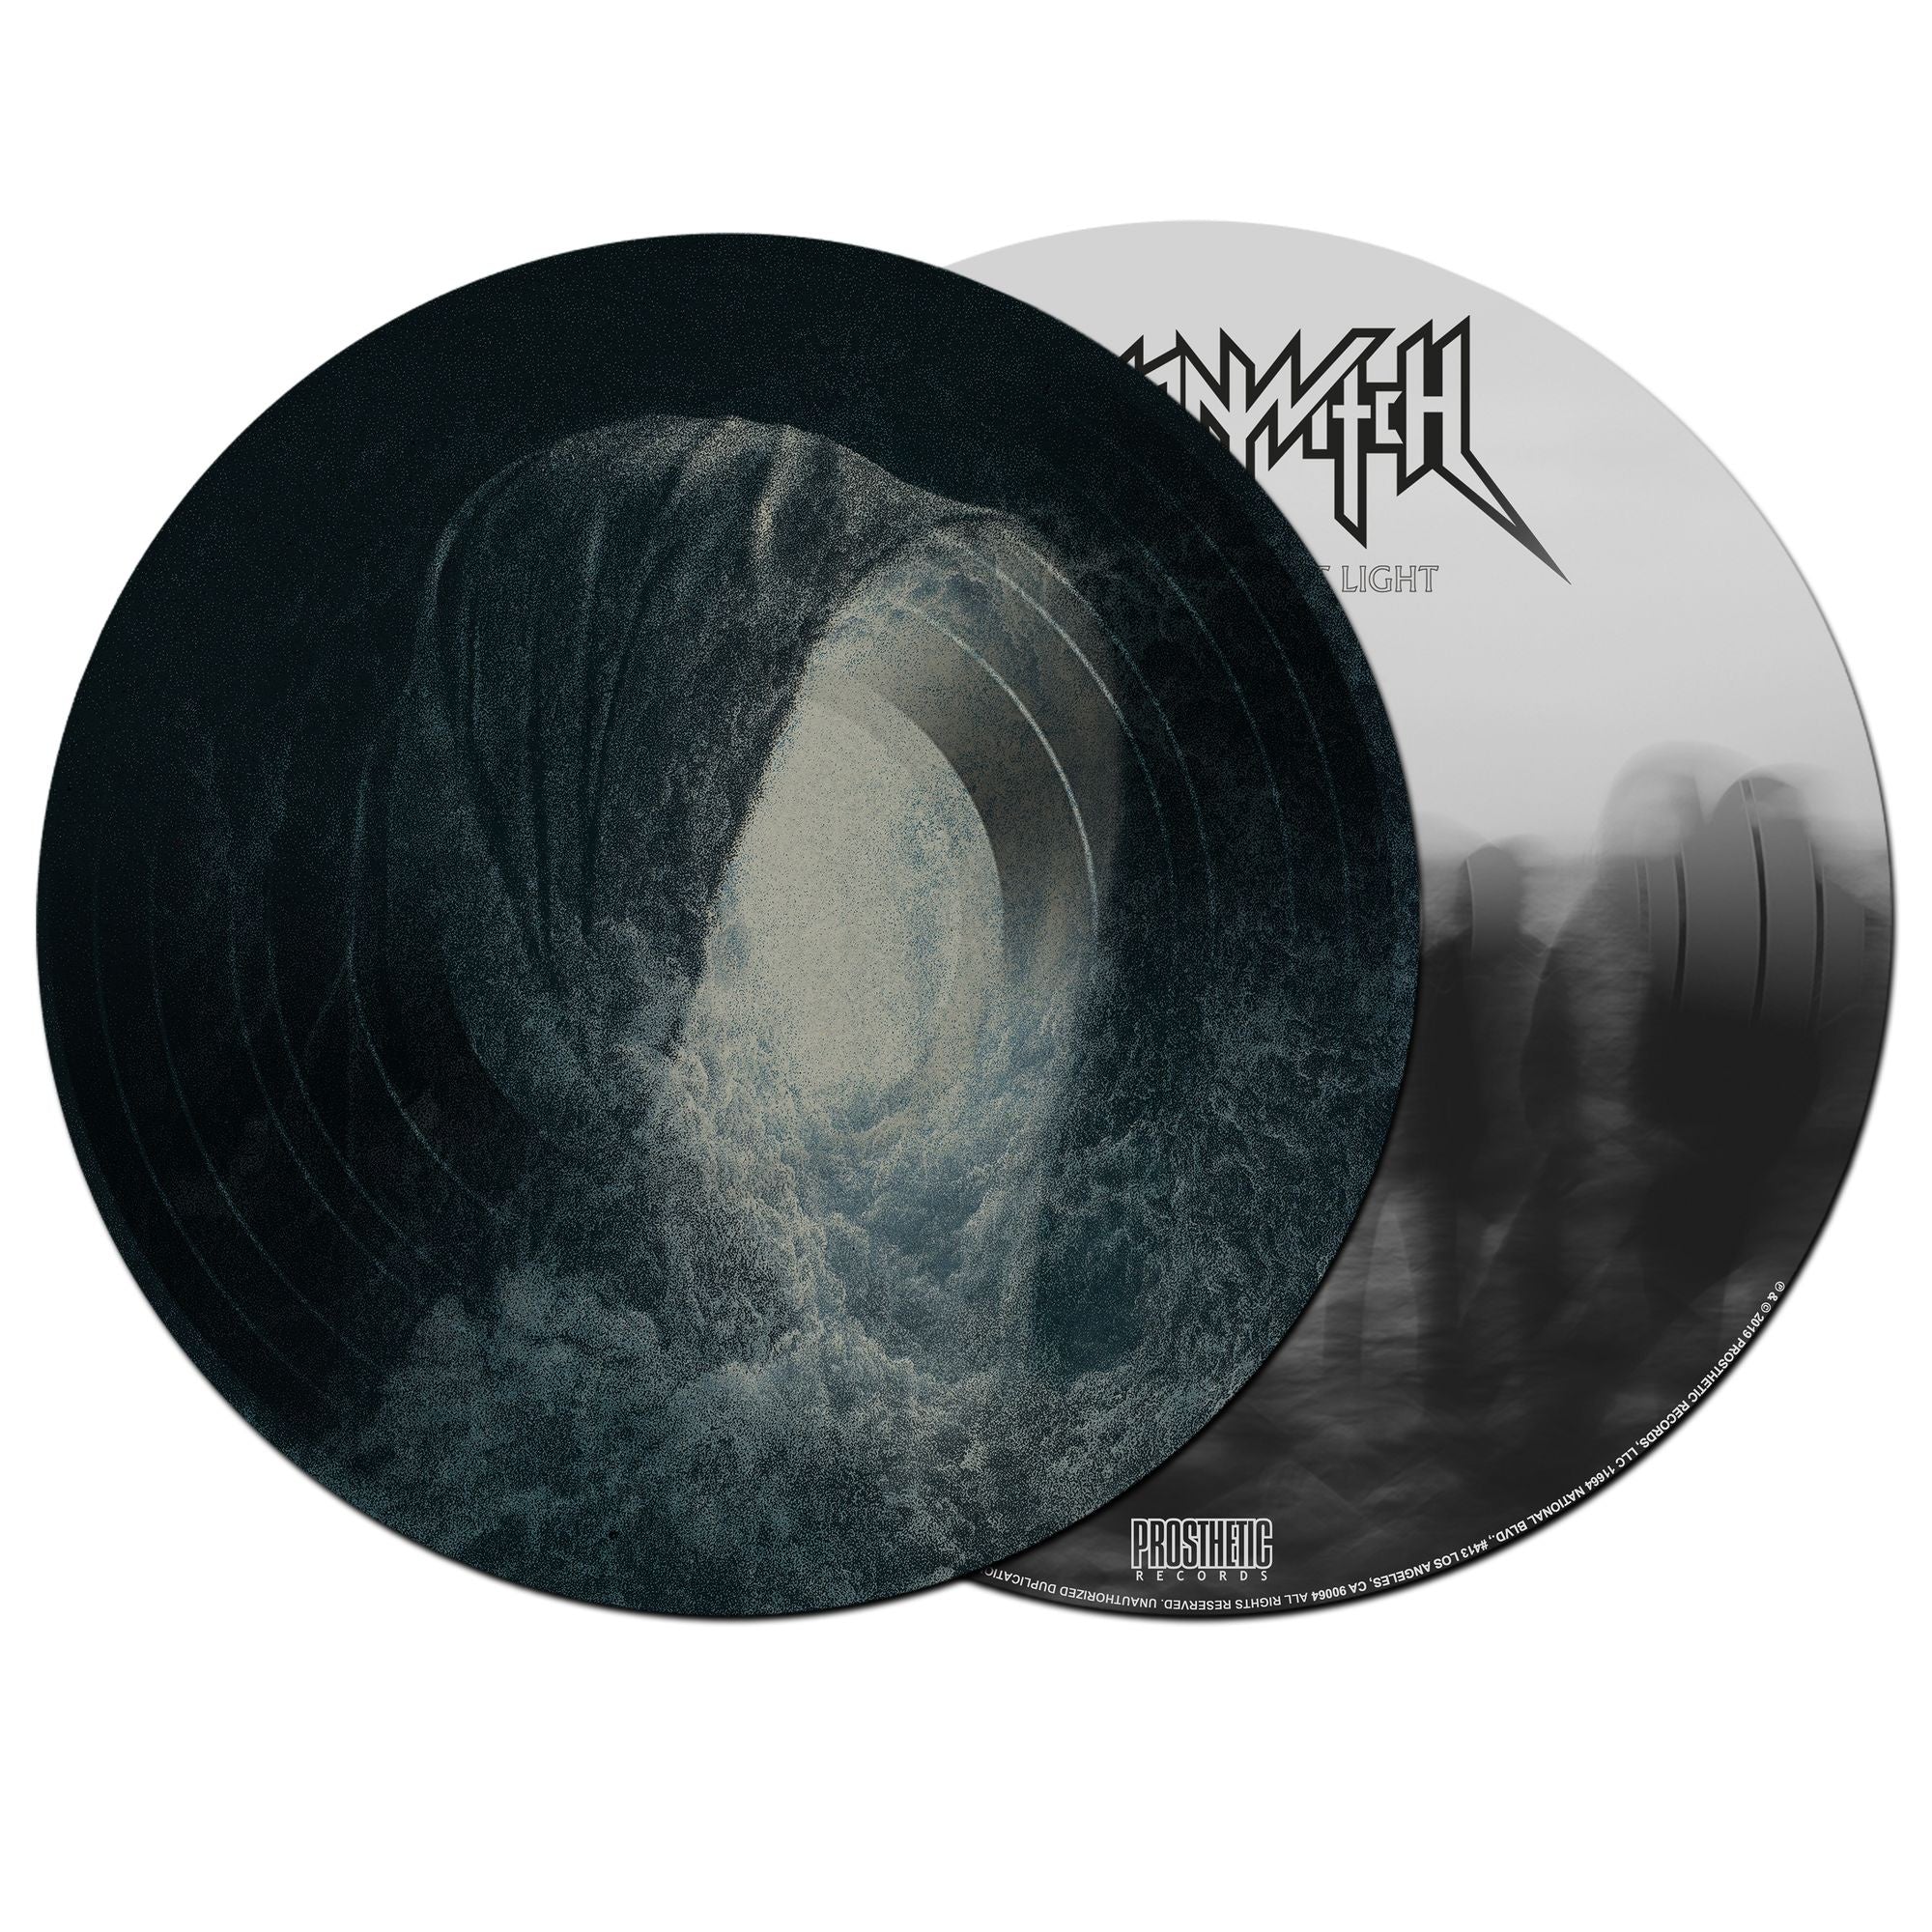 Skeletonwitch - Devouring Radiant Light - New Lp 2019 Prosthetic Picture Disc Reissue (Limited to 300 Worldwide!) - Black Metal / Thrash